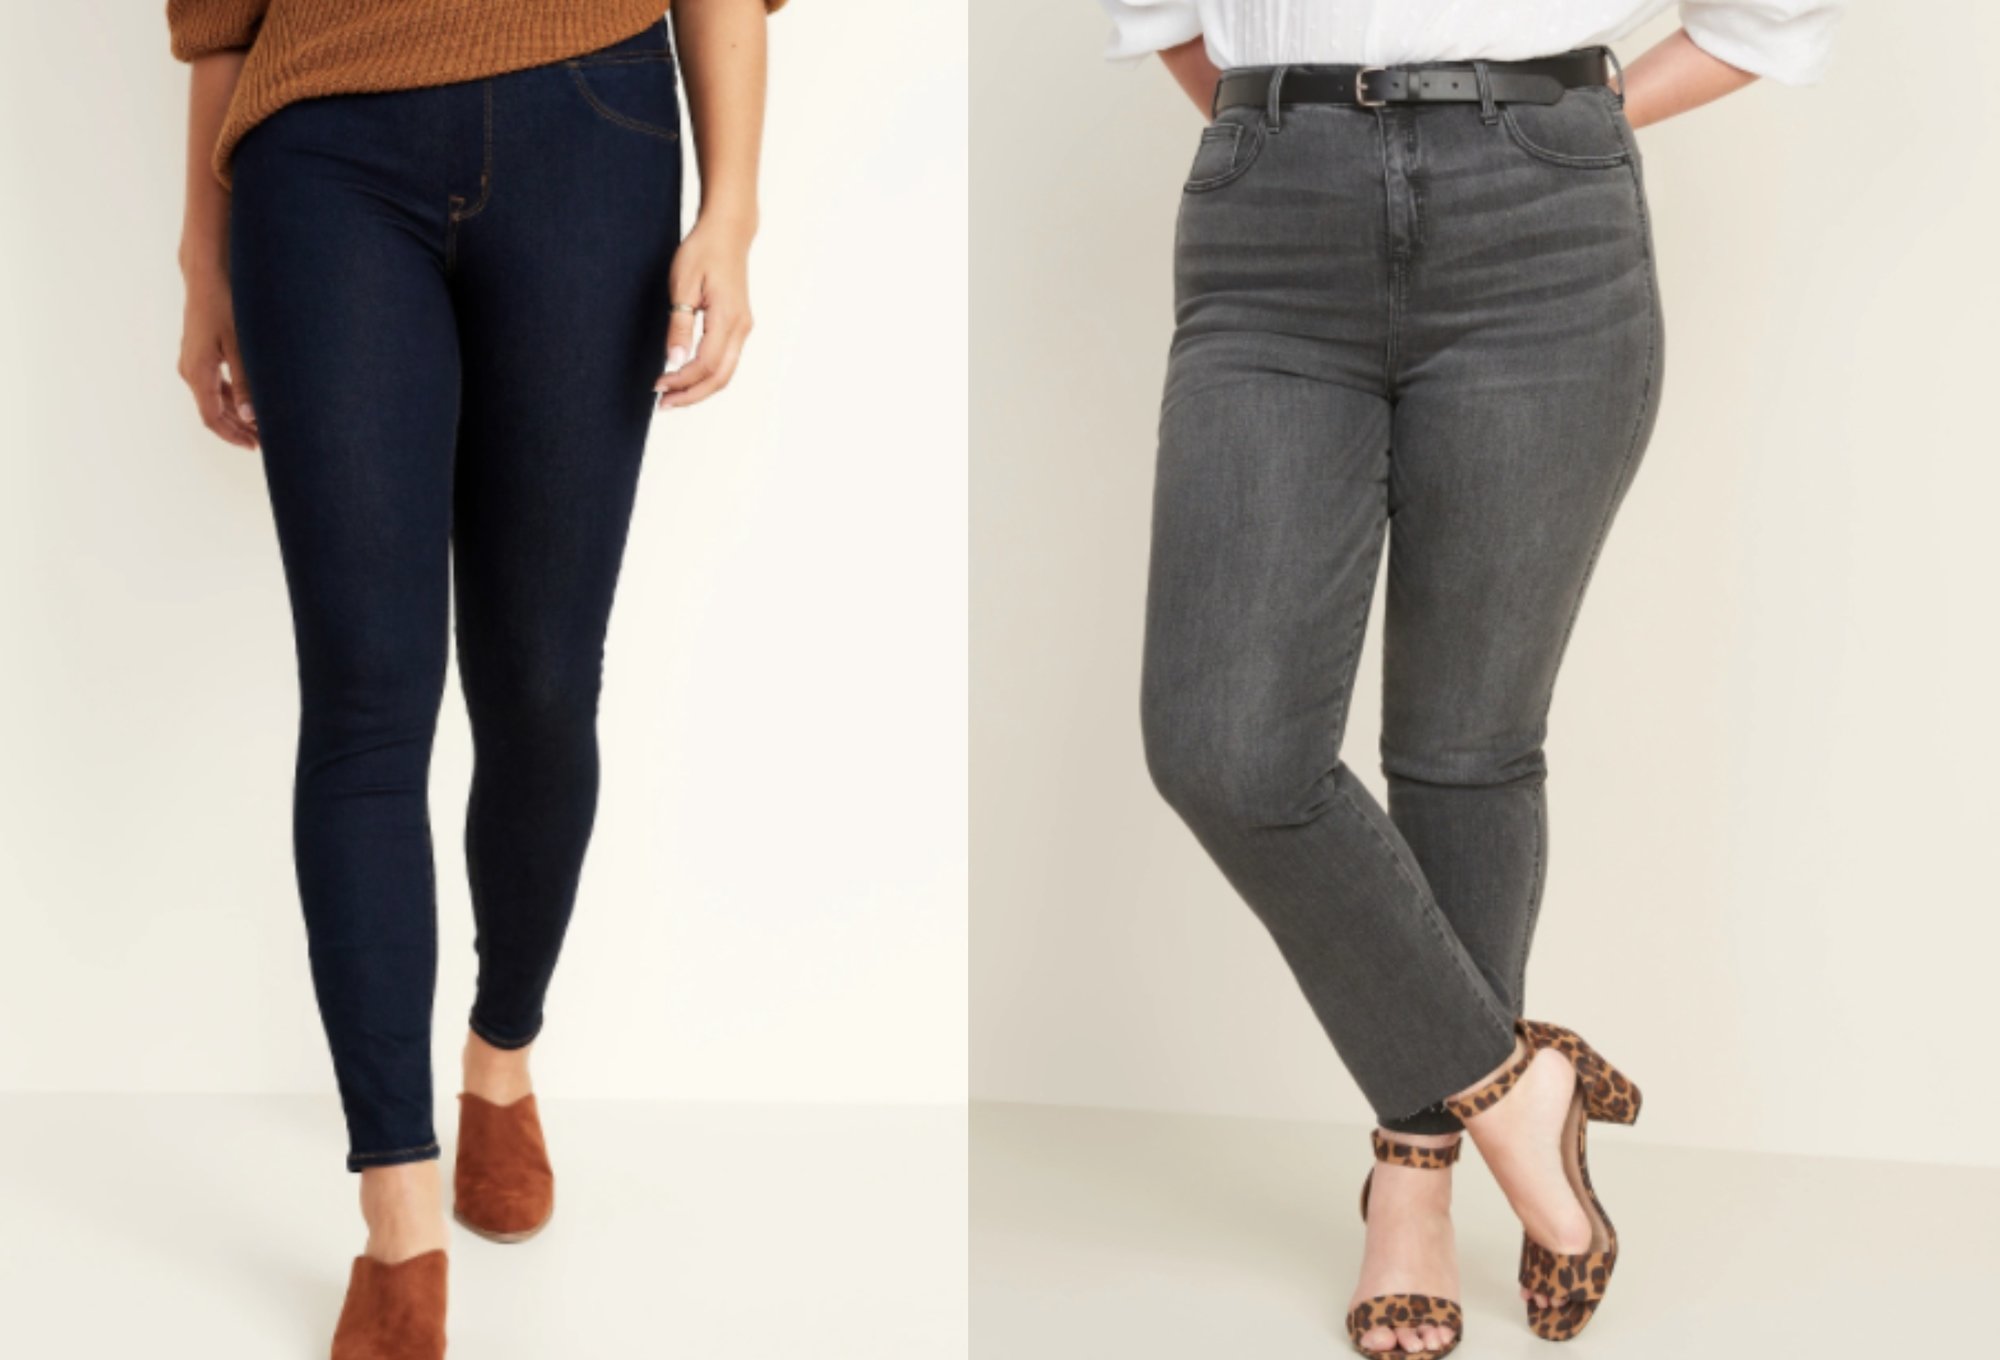 old navy jeans fit guide